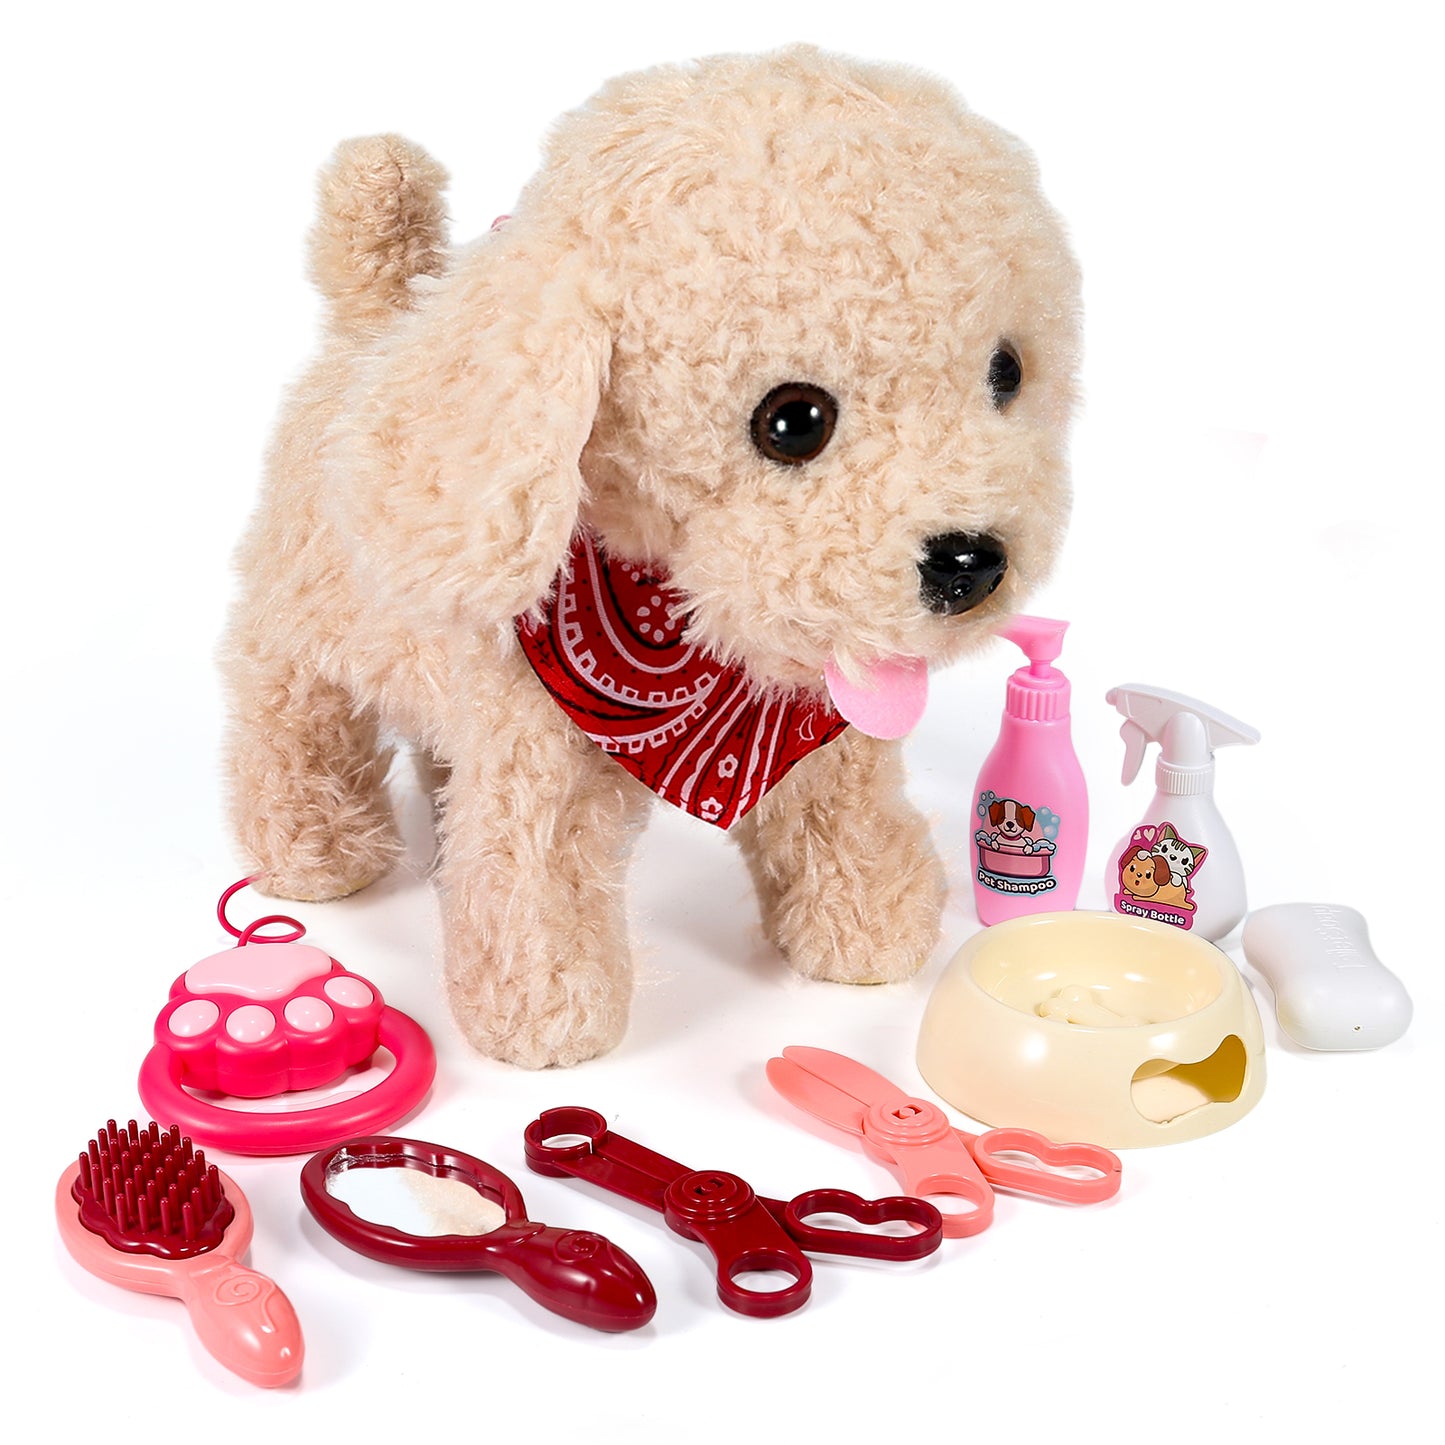 Spark Imagination with a Lifelike Walking, Barking, and Tail-Wagging Toy Pet! Complete Grooming Set and Leash Included for Kids' Creative Play